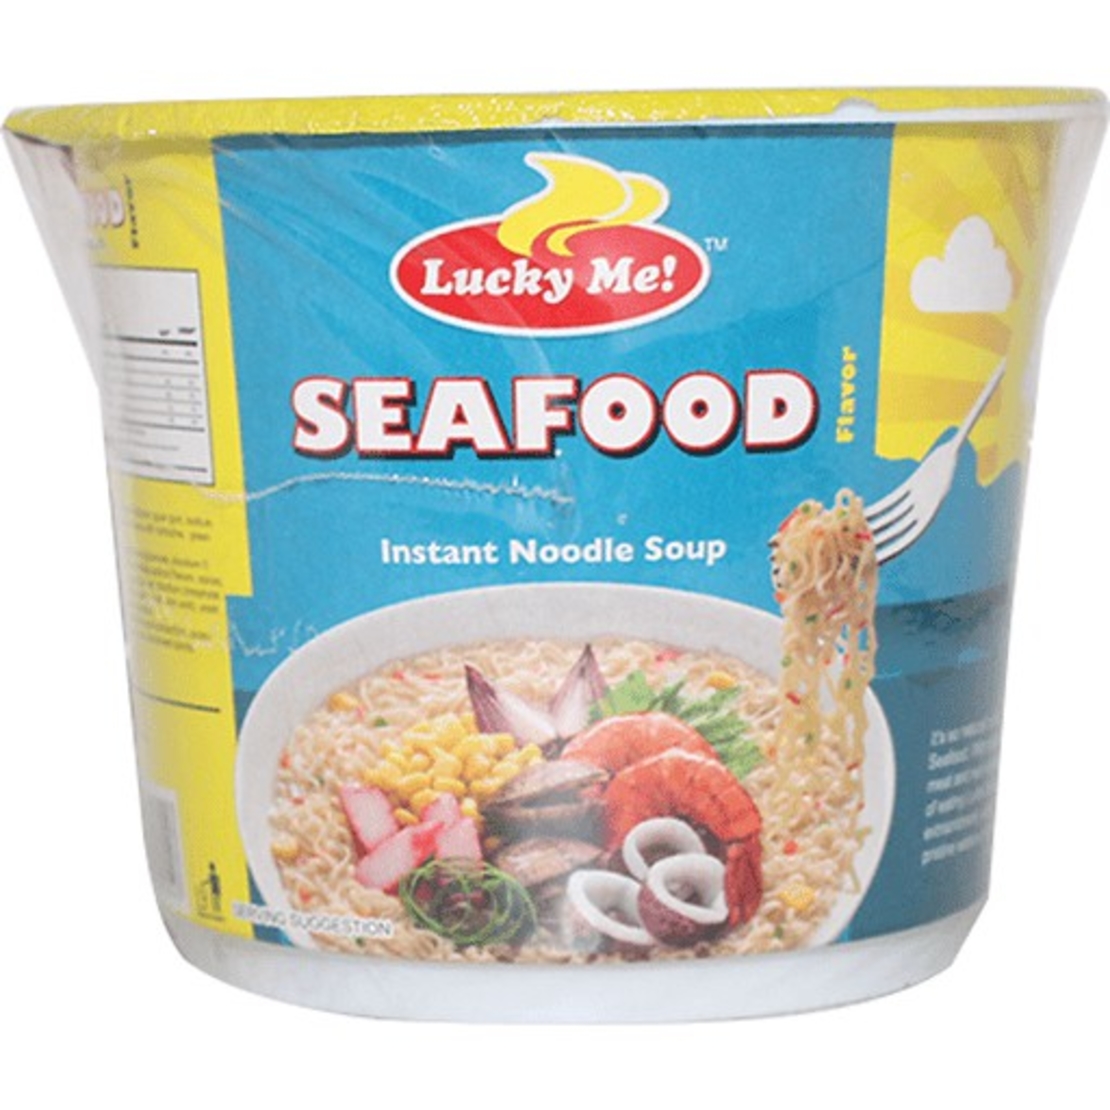 Lucky me - Seafood  instant noodle soup